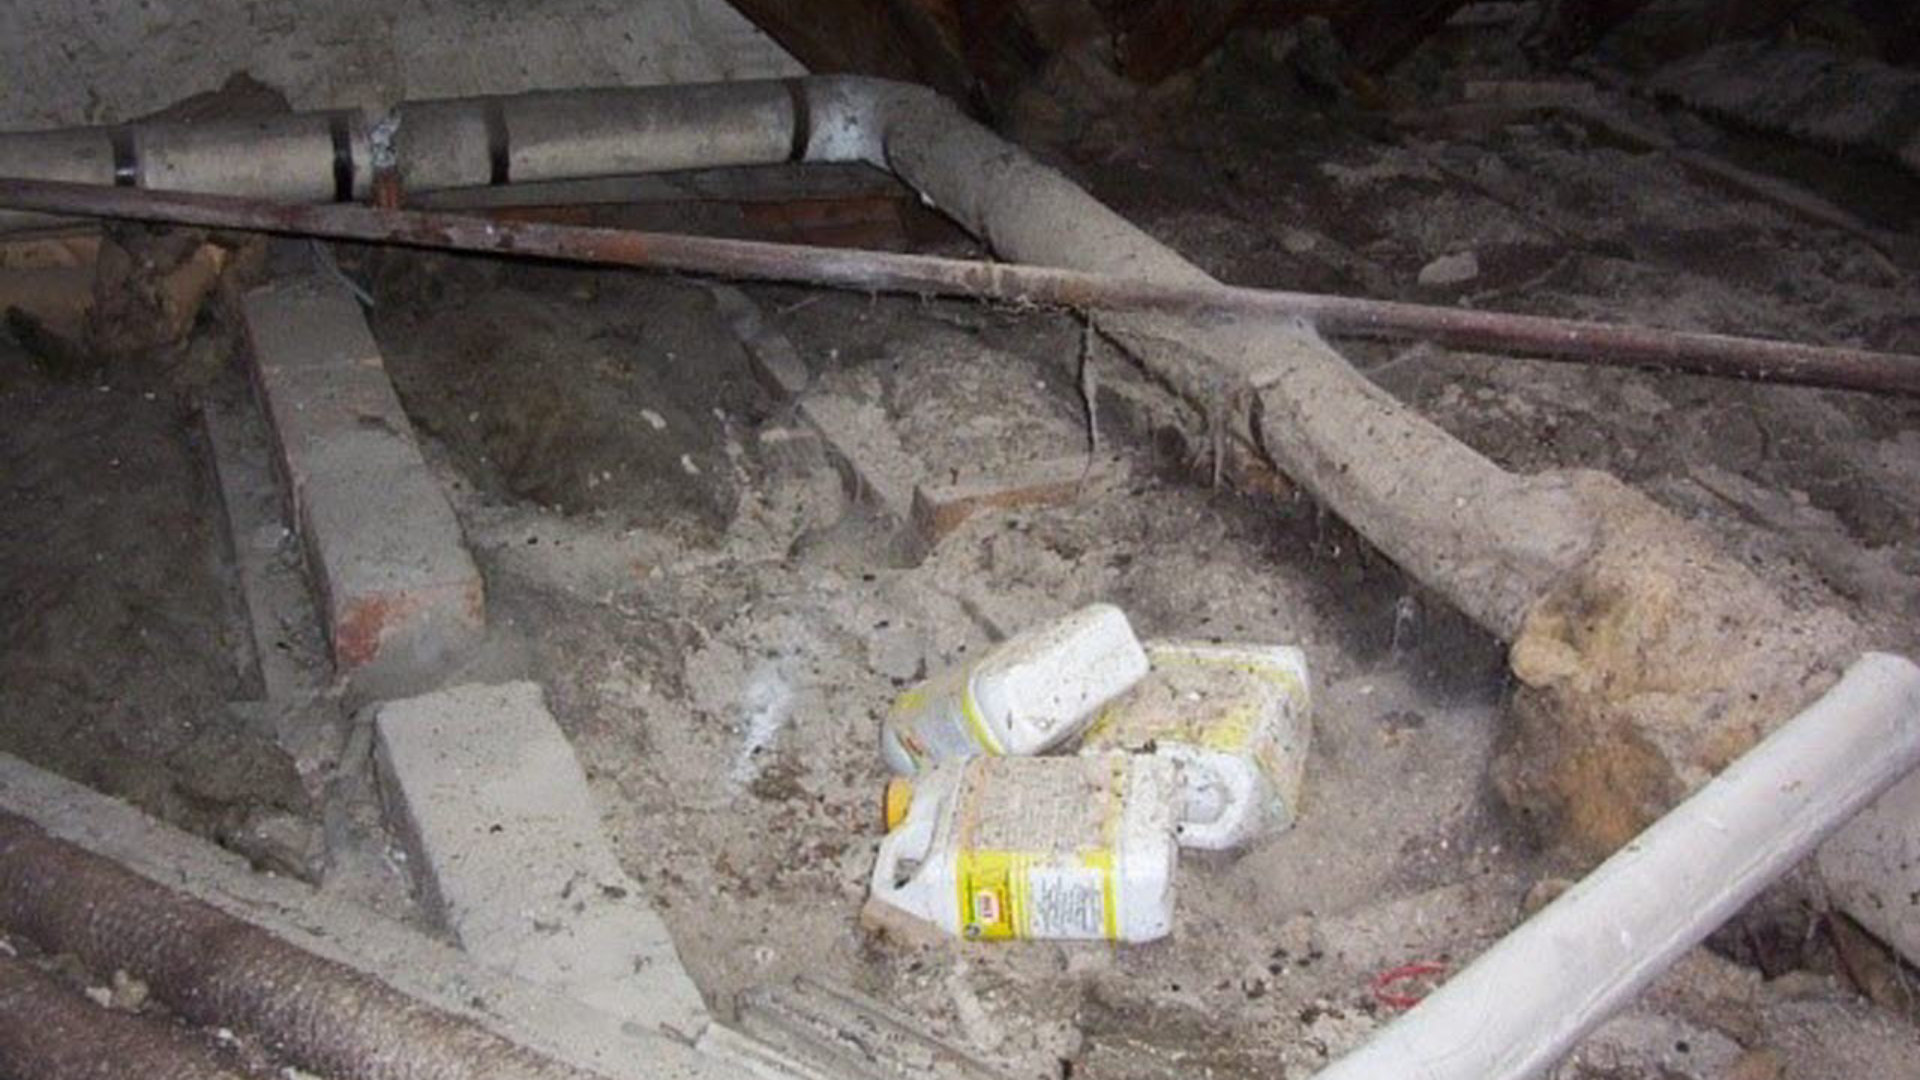 Sectional asbestos insulation in roof space of residential property 